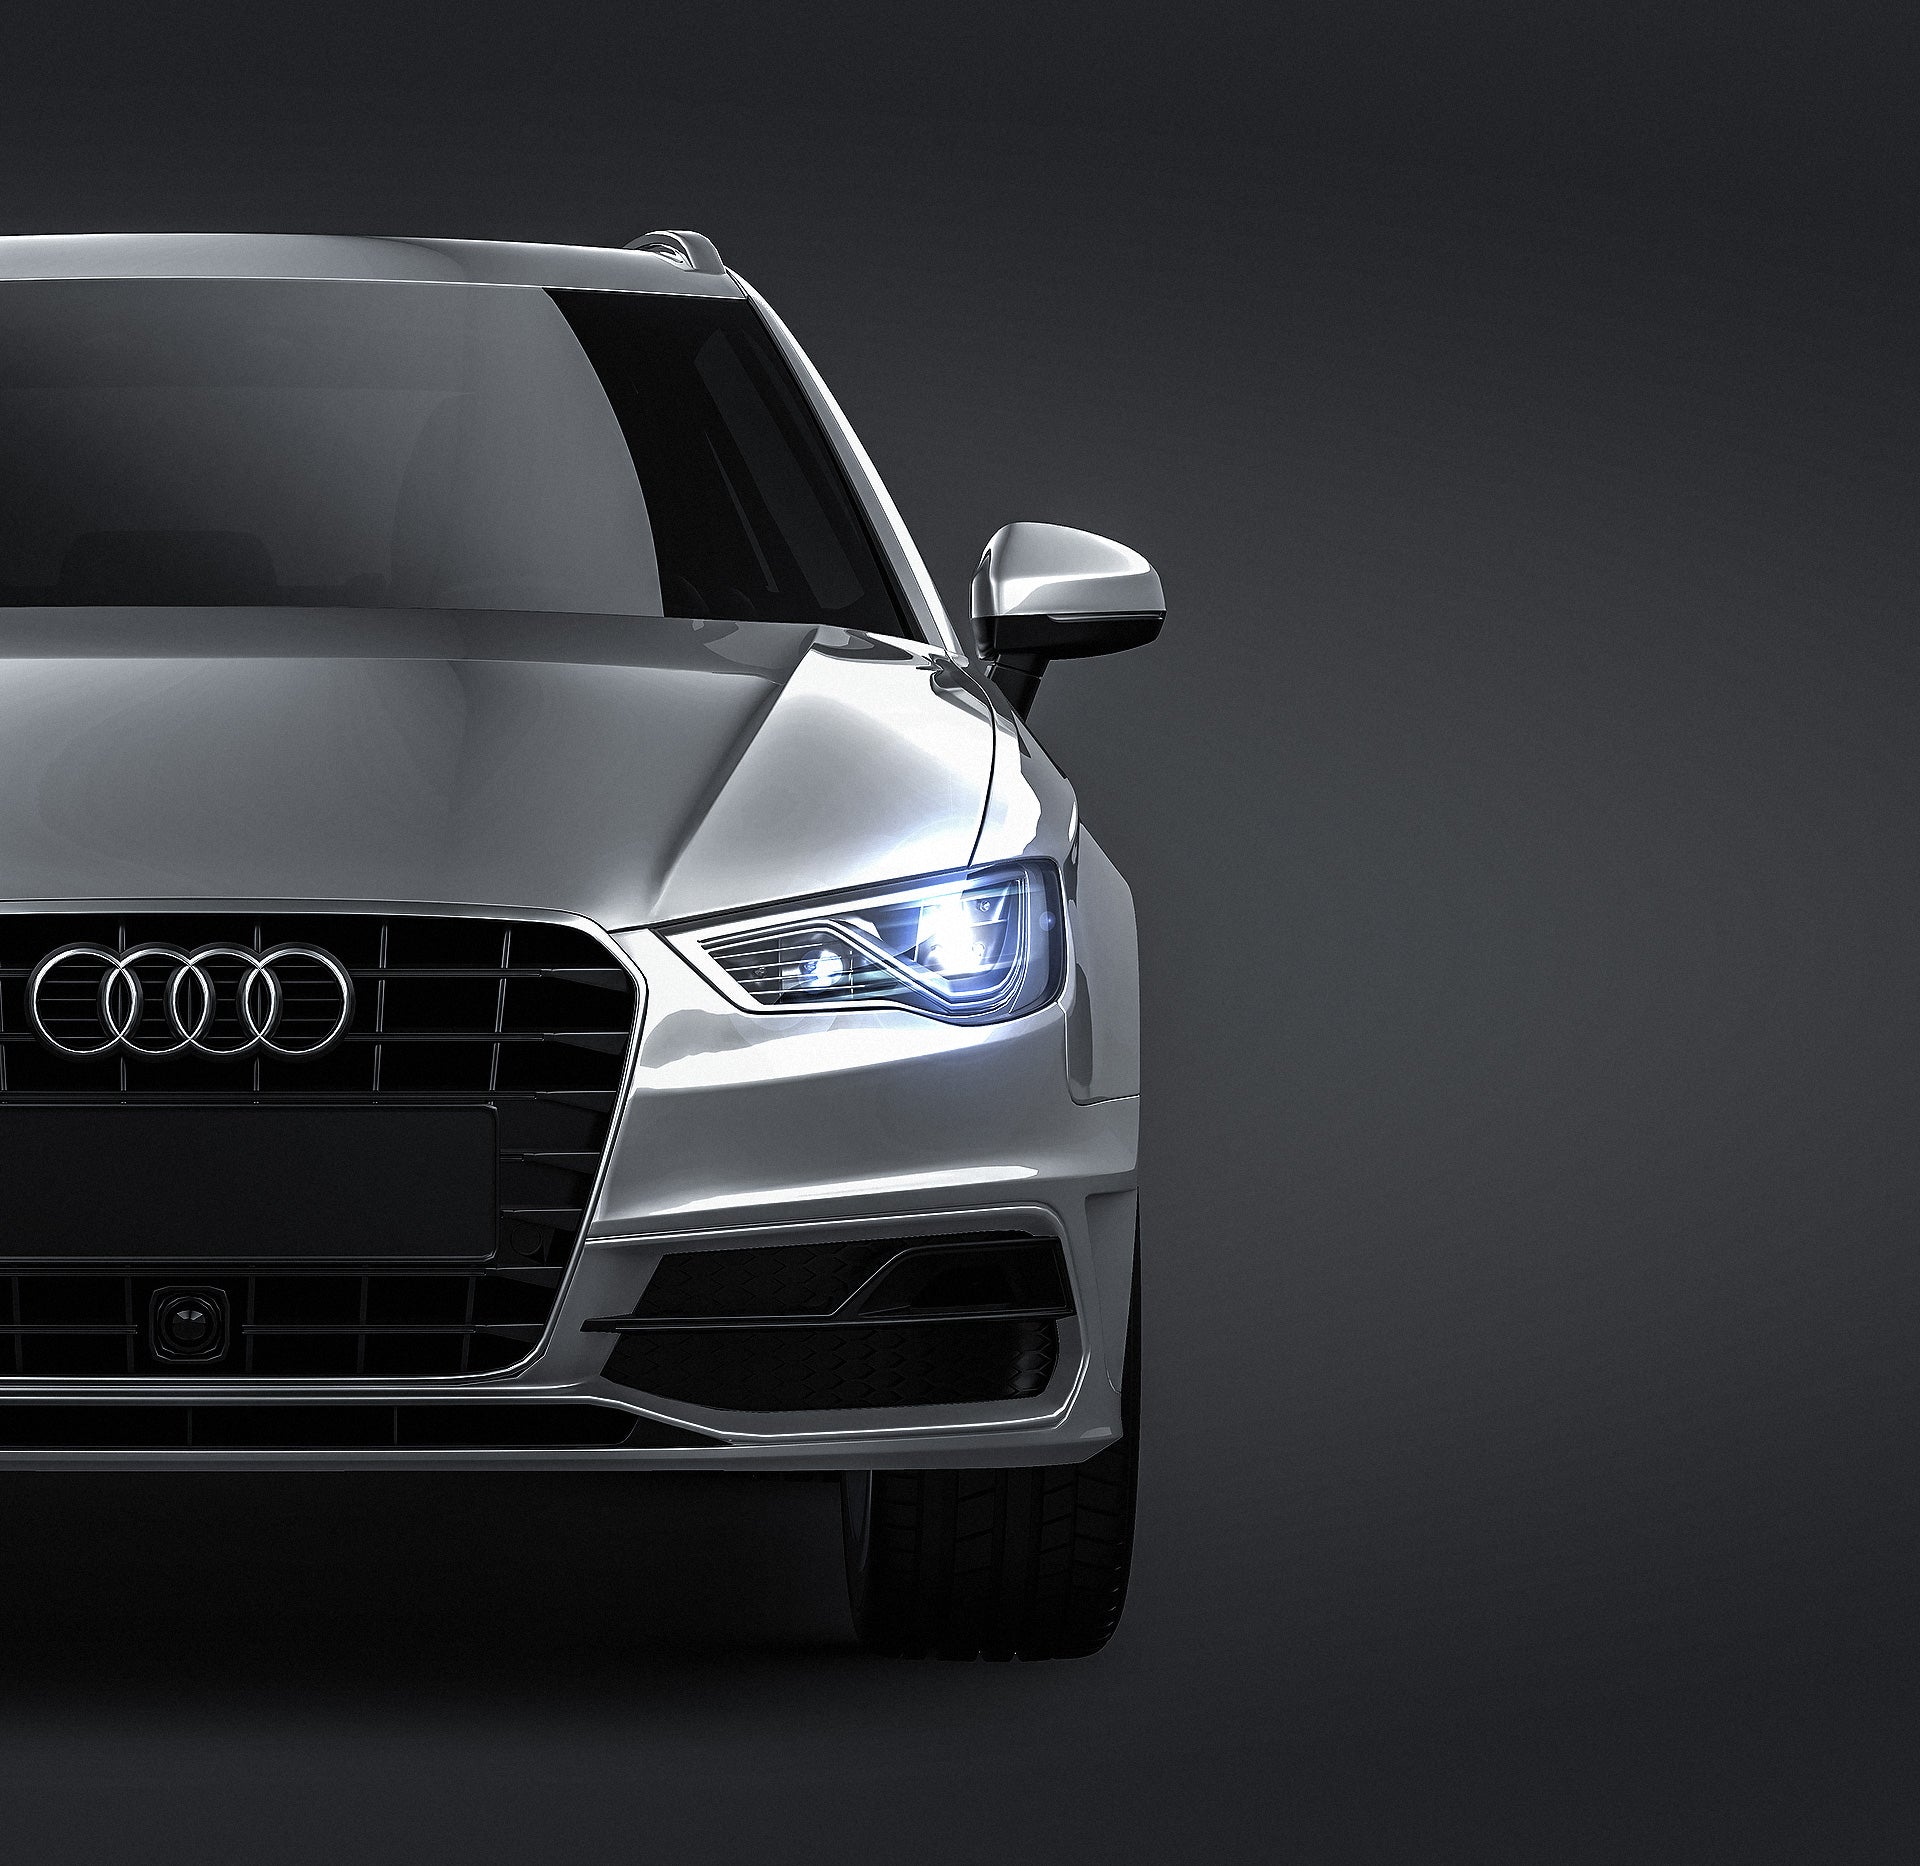 Audi A3 5-door 2014 S-line glossy finish - all sides Car Mockup Template.psd